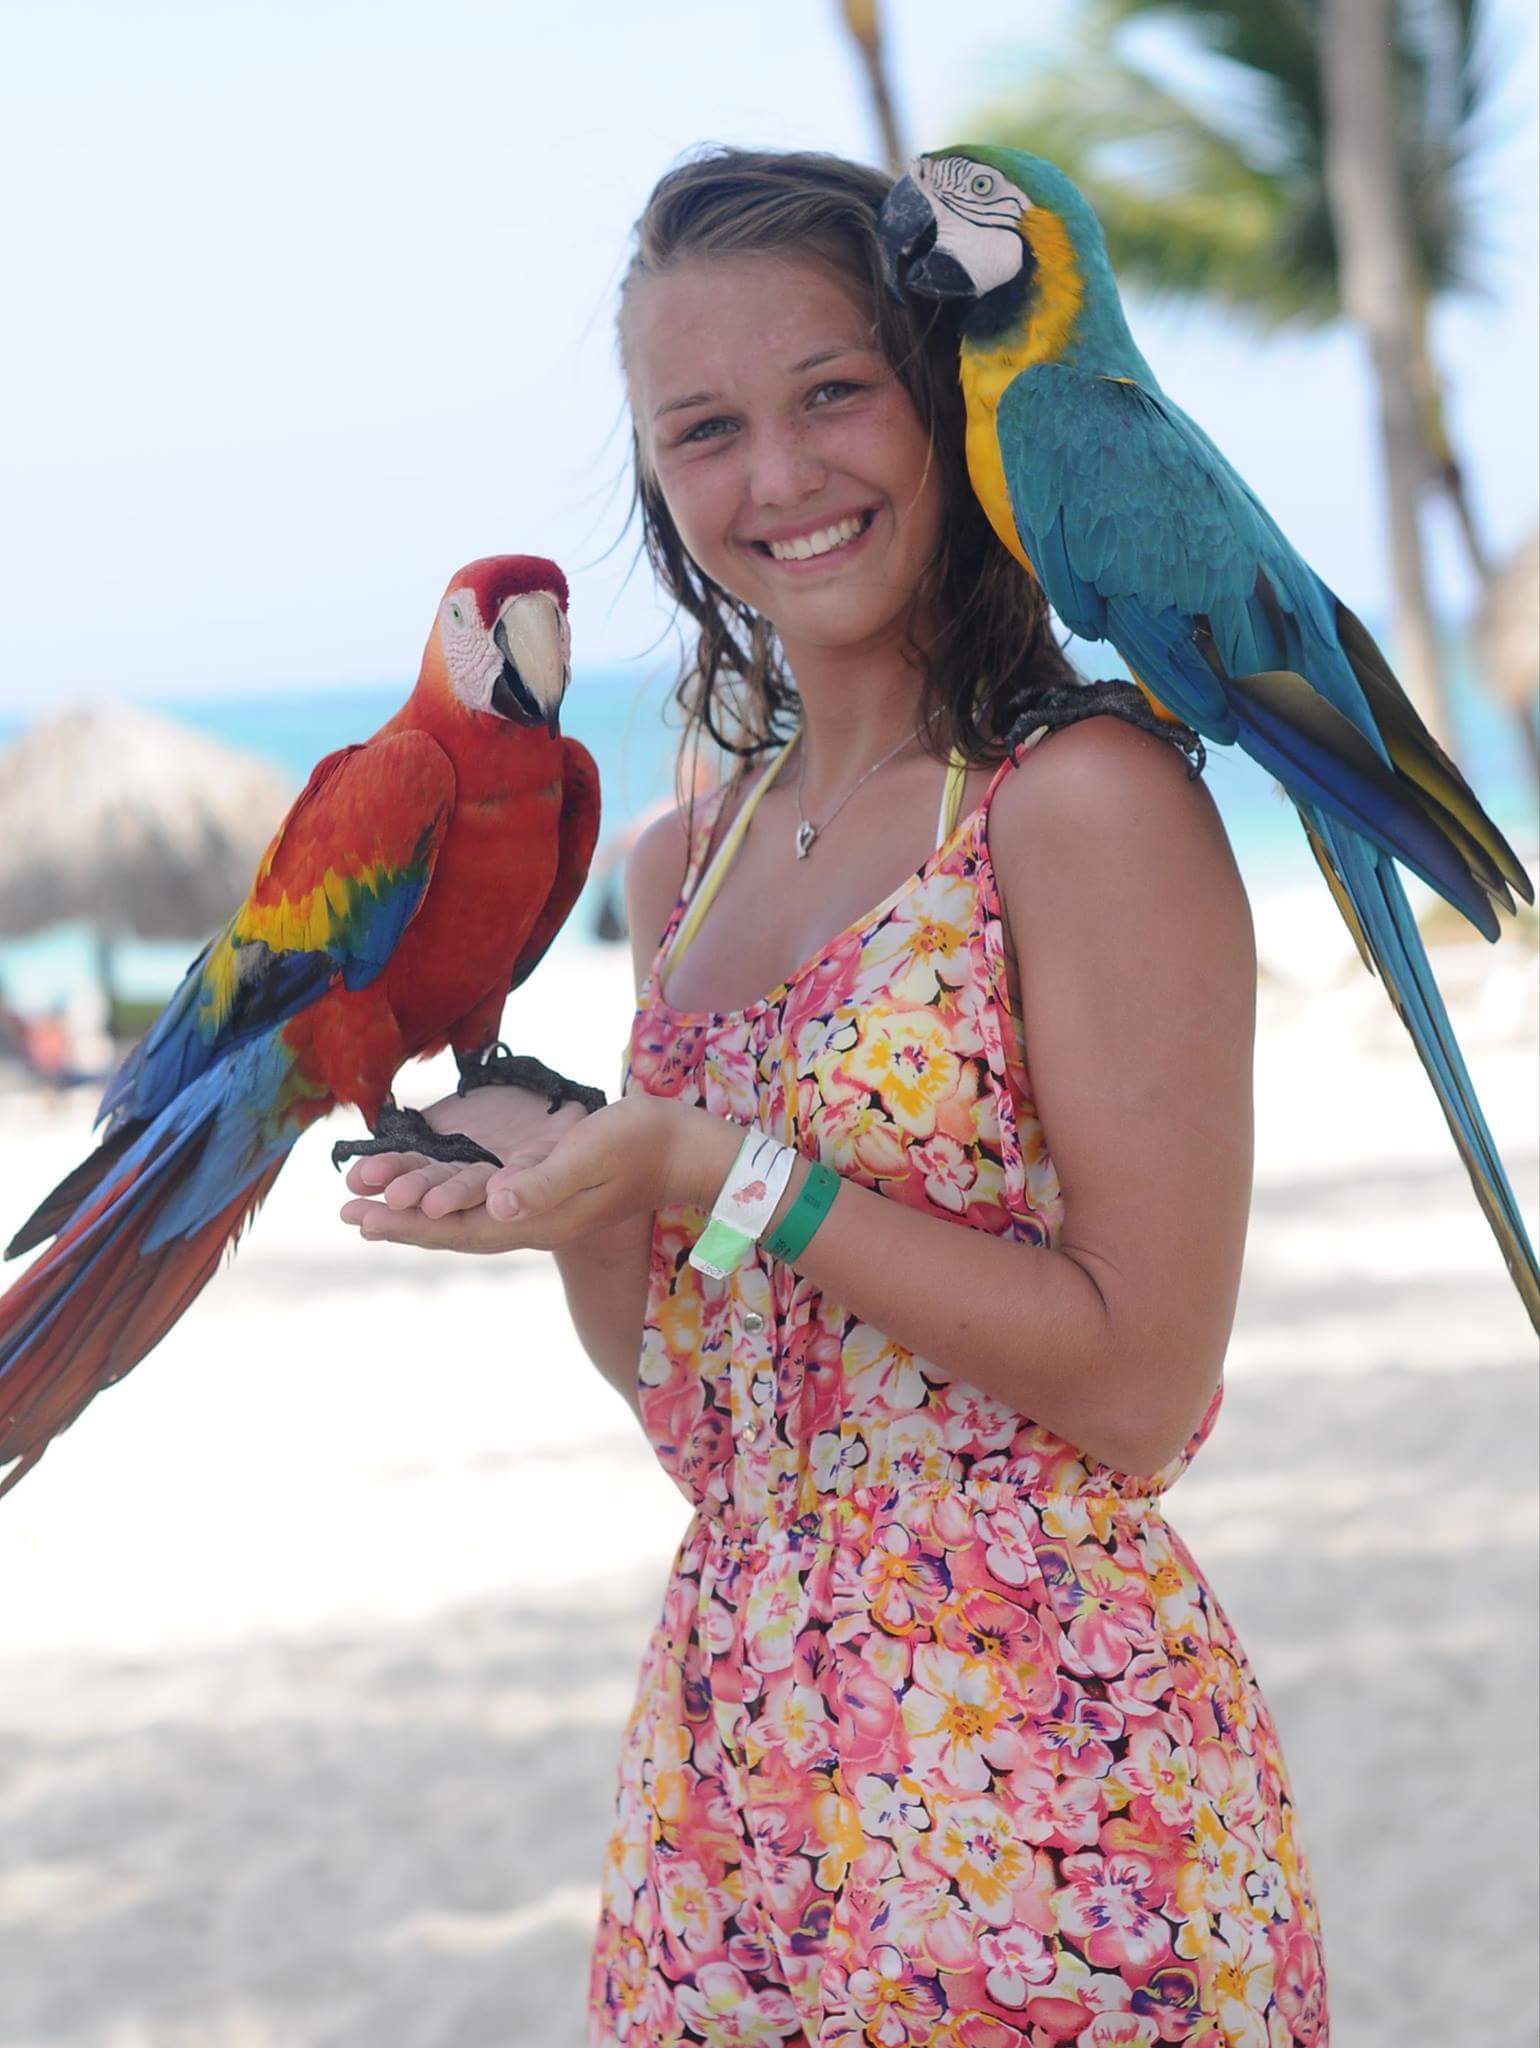 This is a picture of me with two parrots in the Dominican Republic.